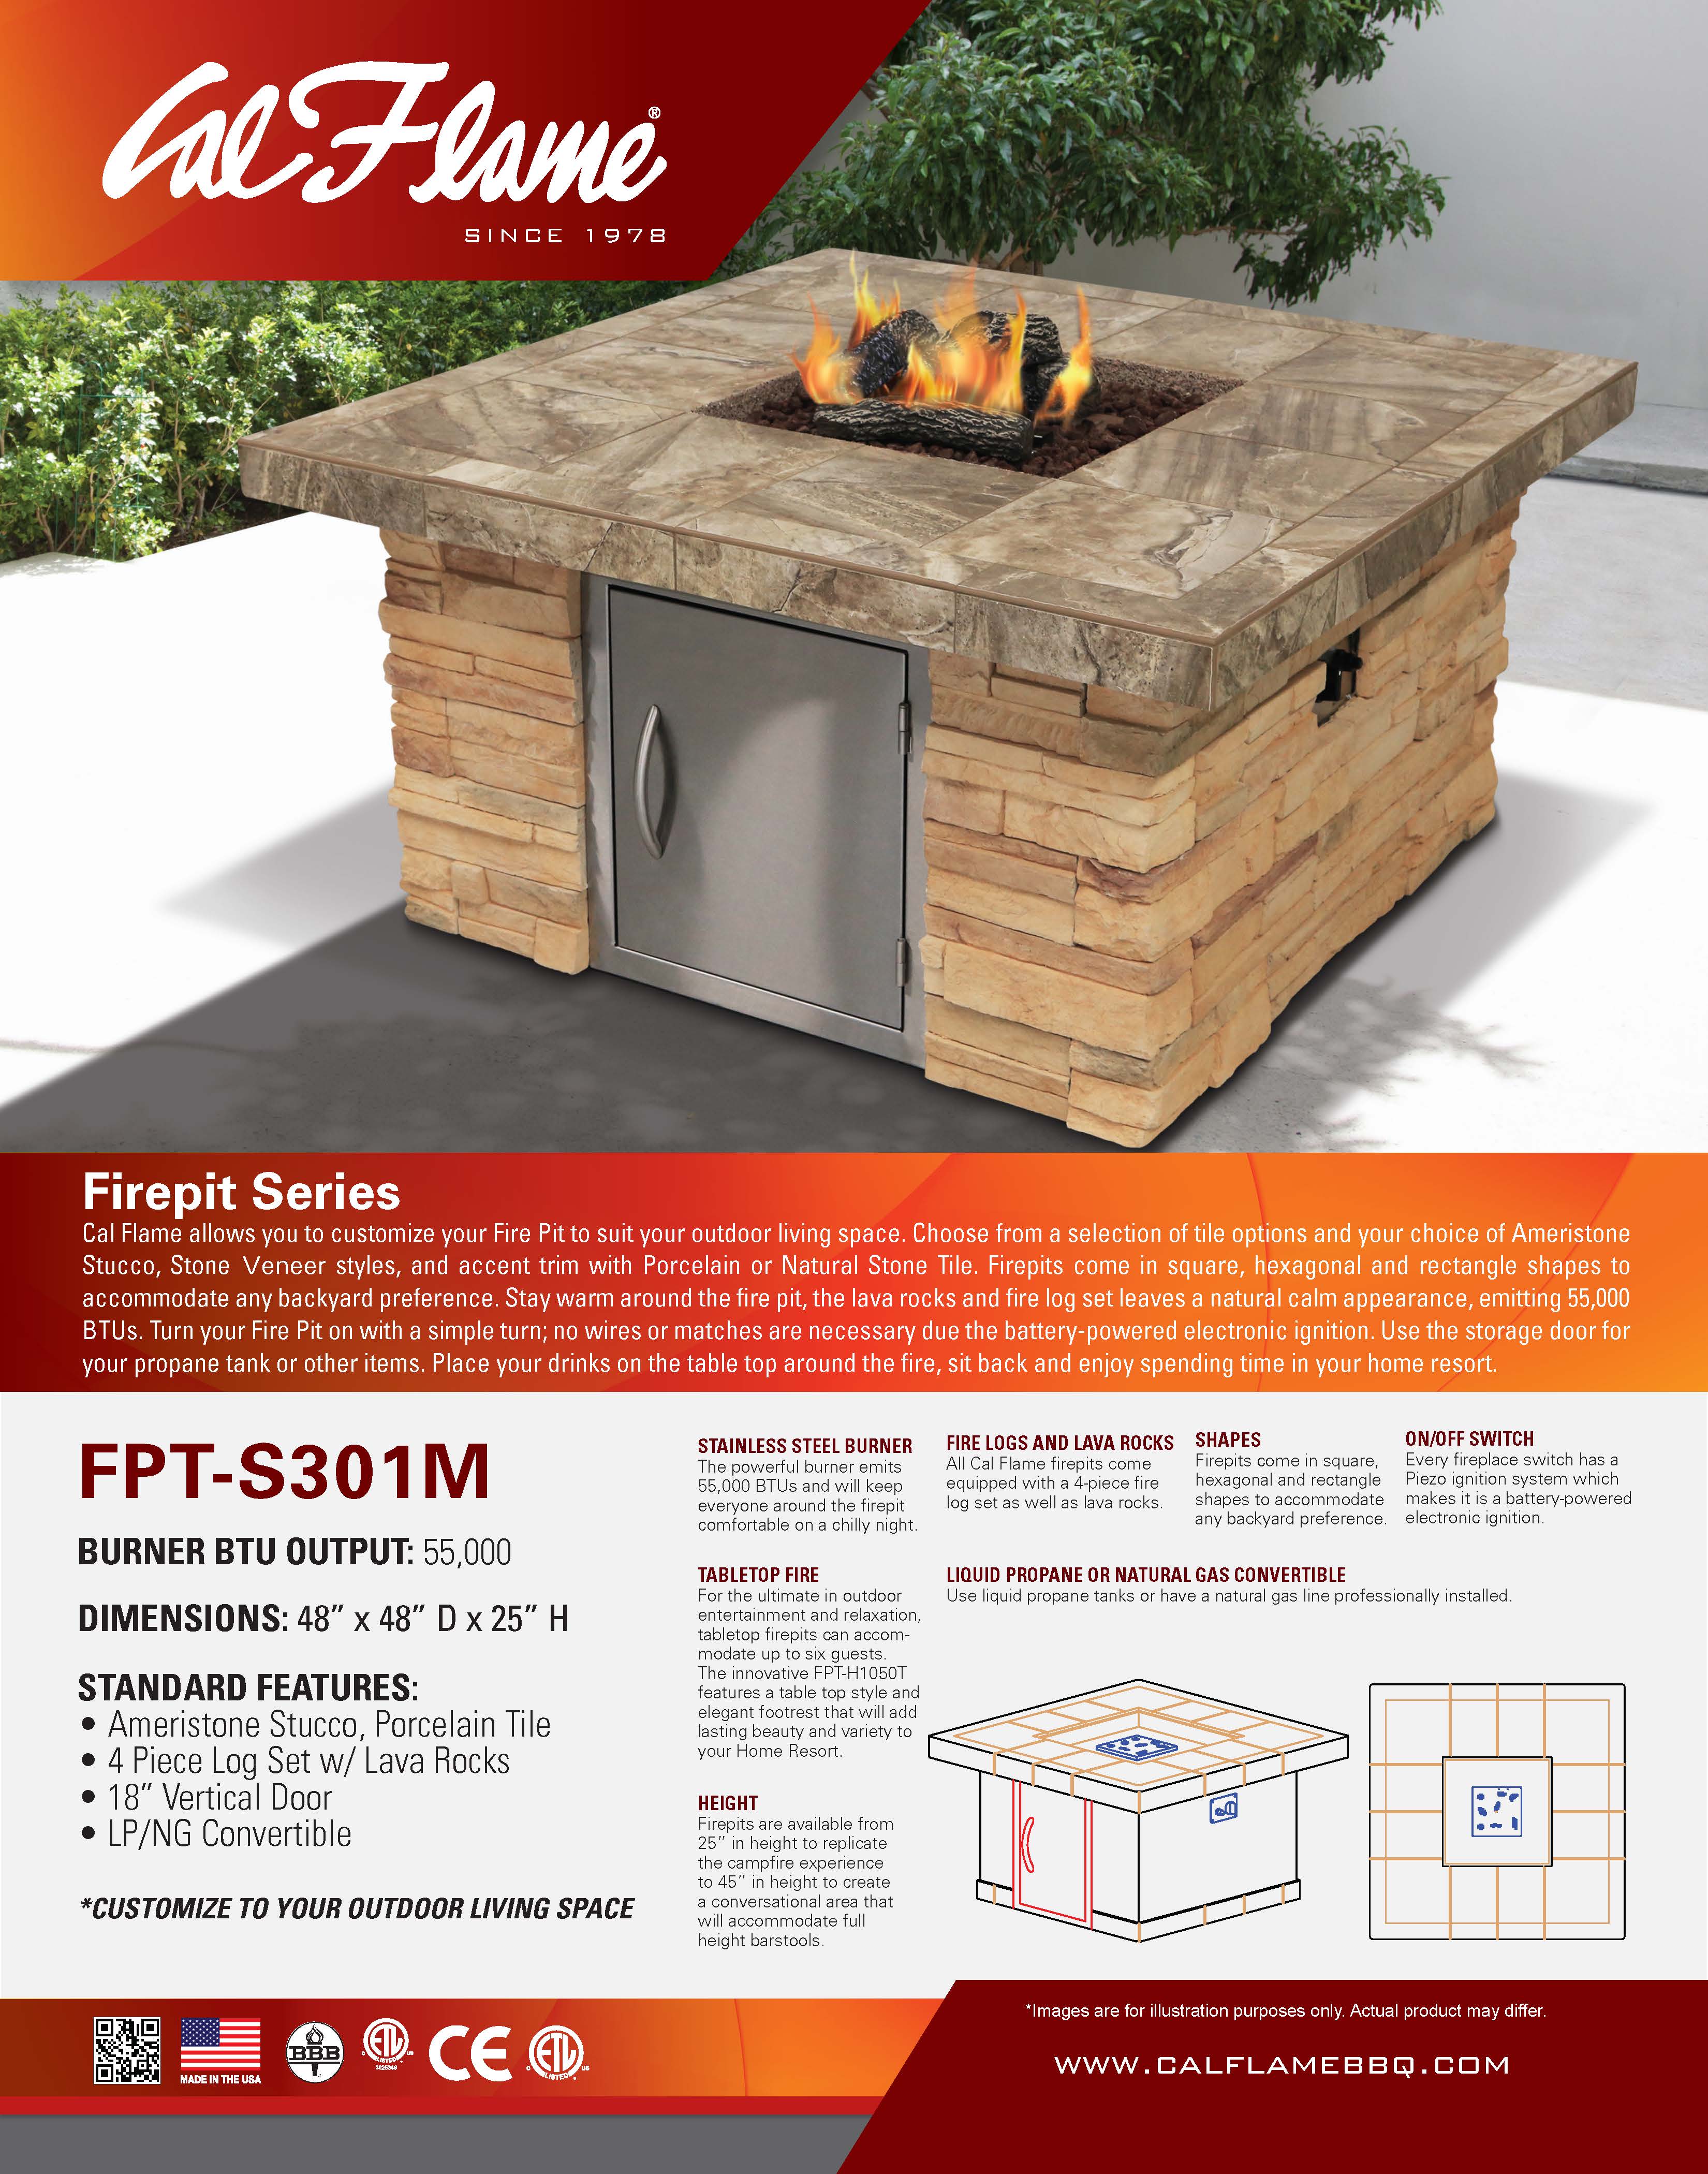 Cal Flame FPT-S301M Fire Pit